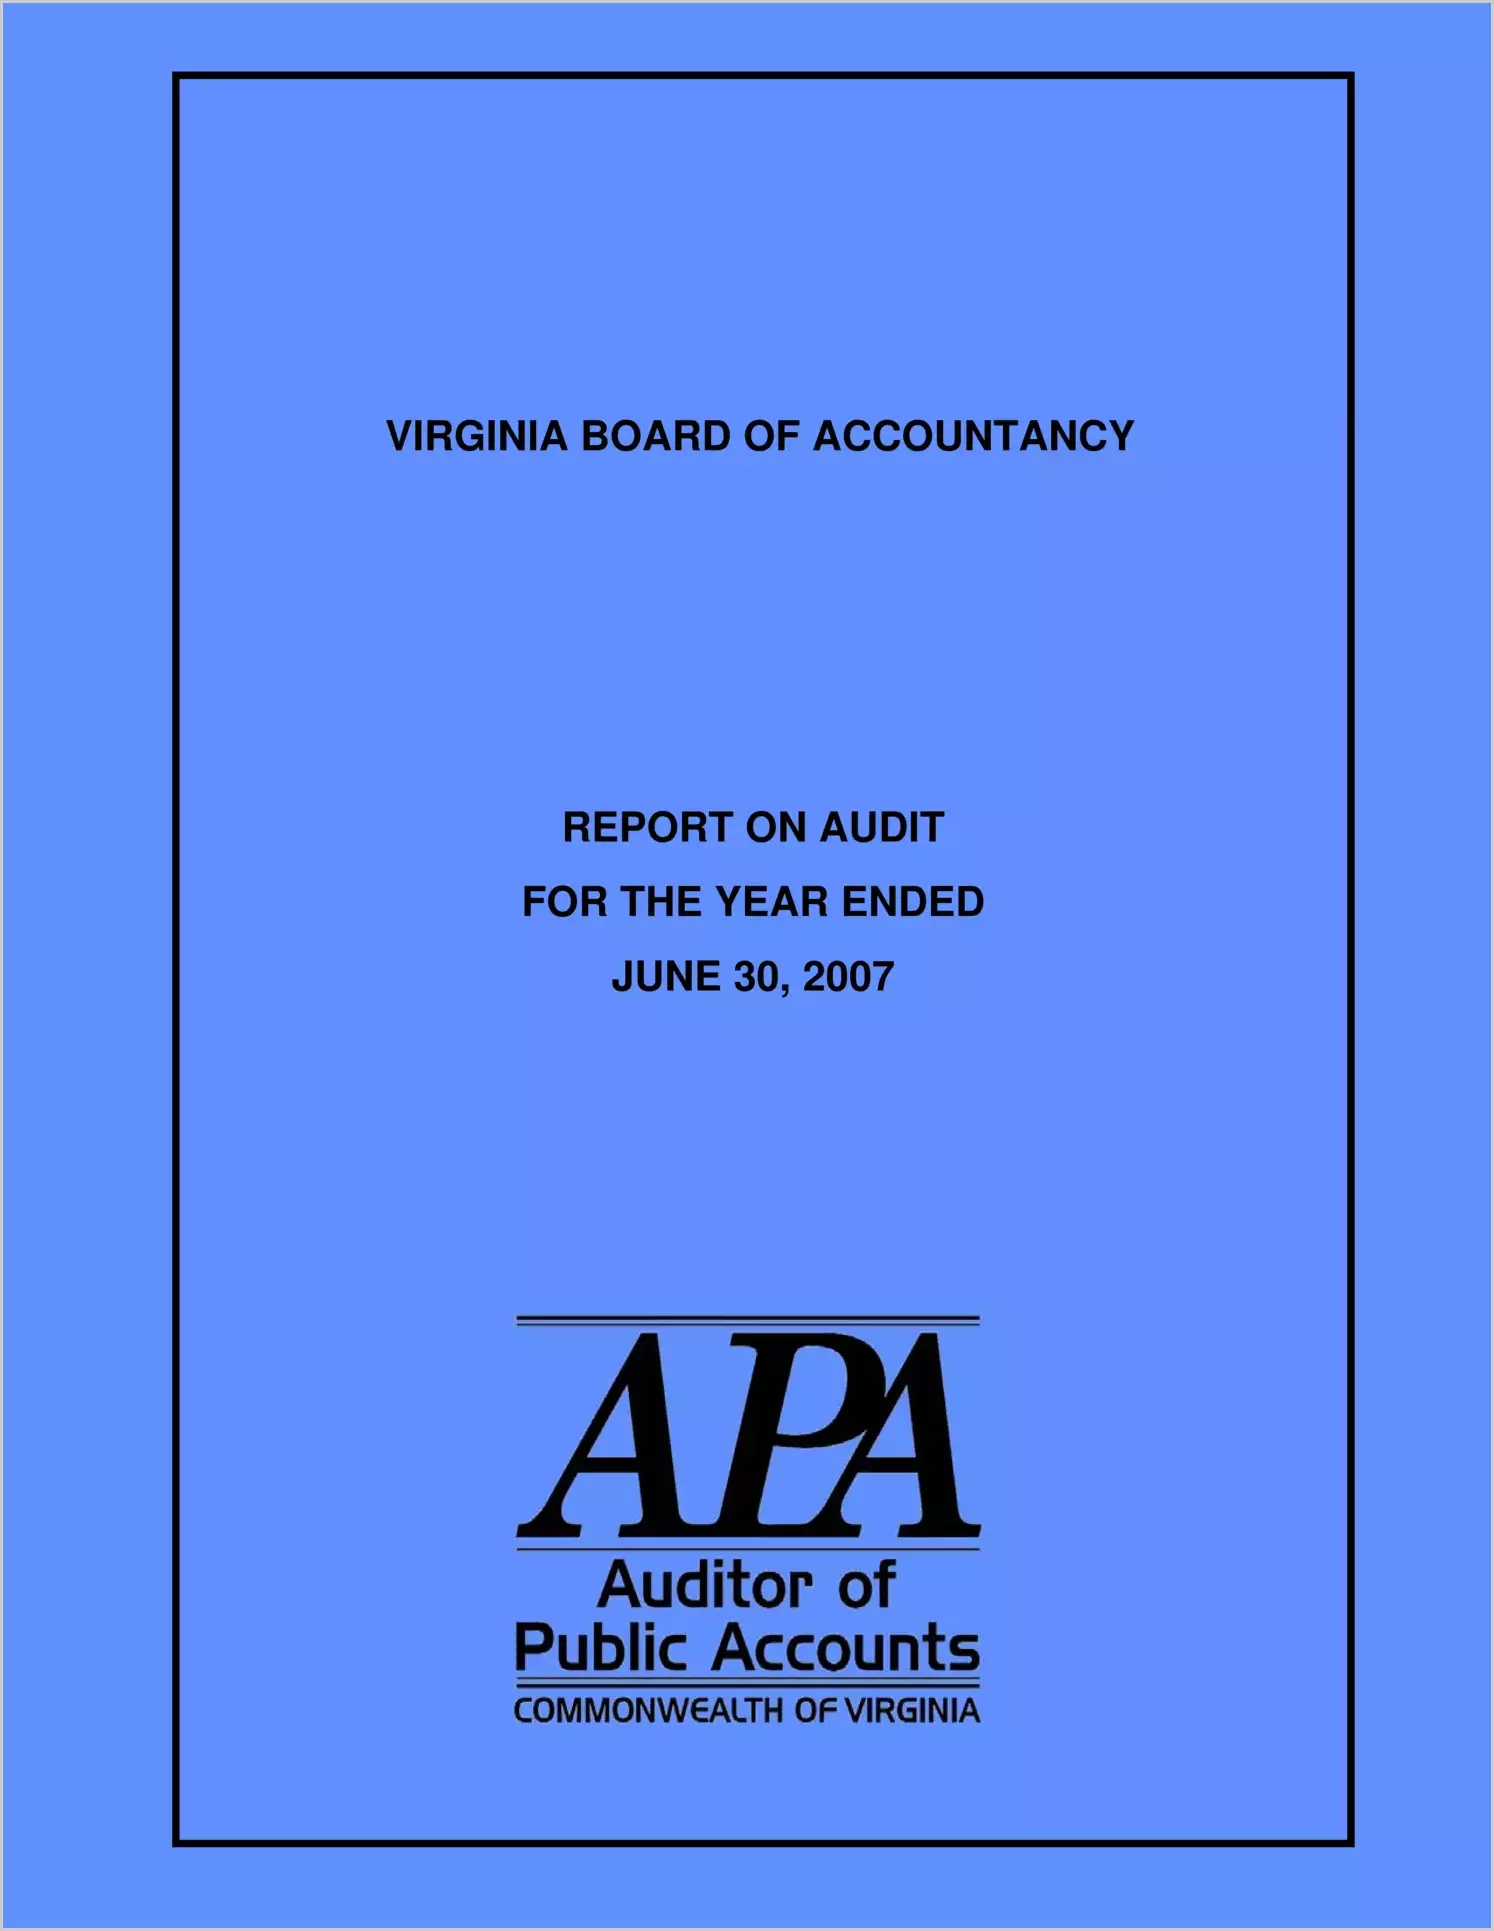 Virginia Board of Accountancy for the year ended June 30, 2007